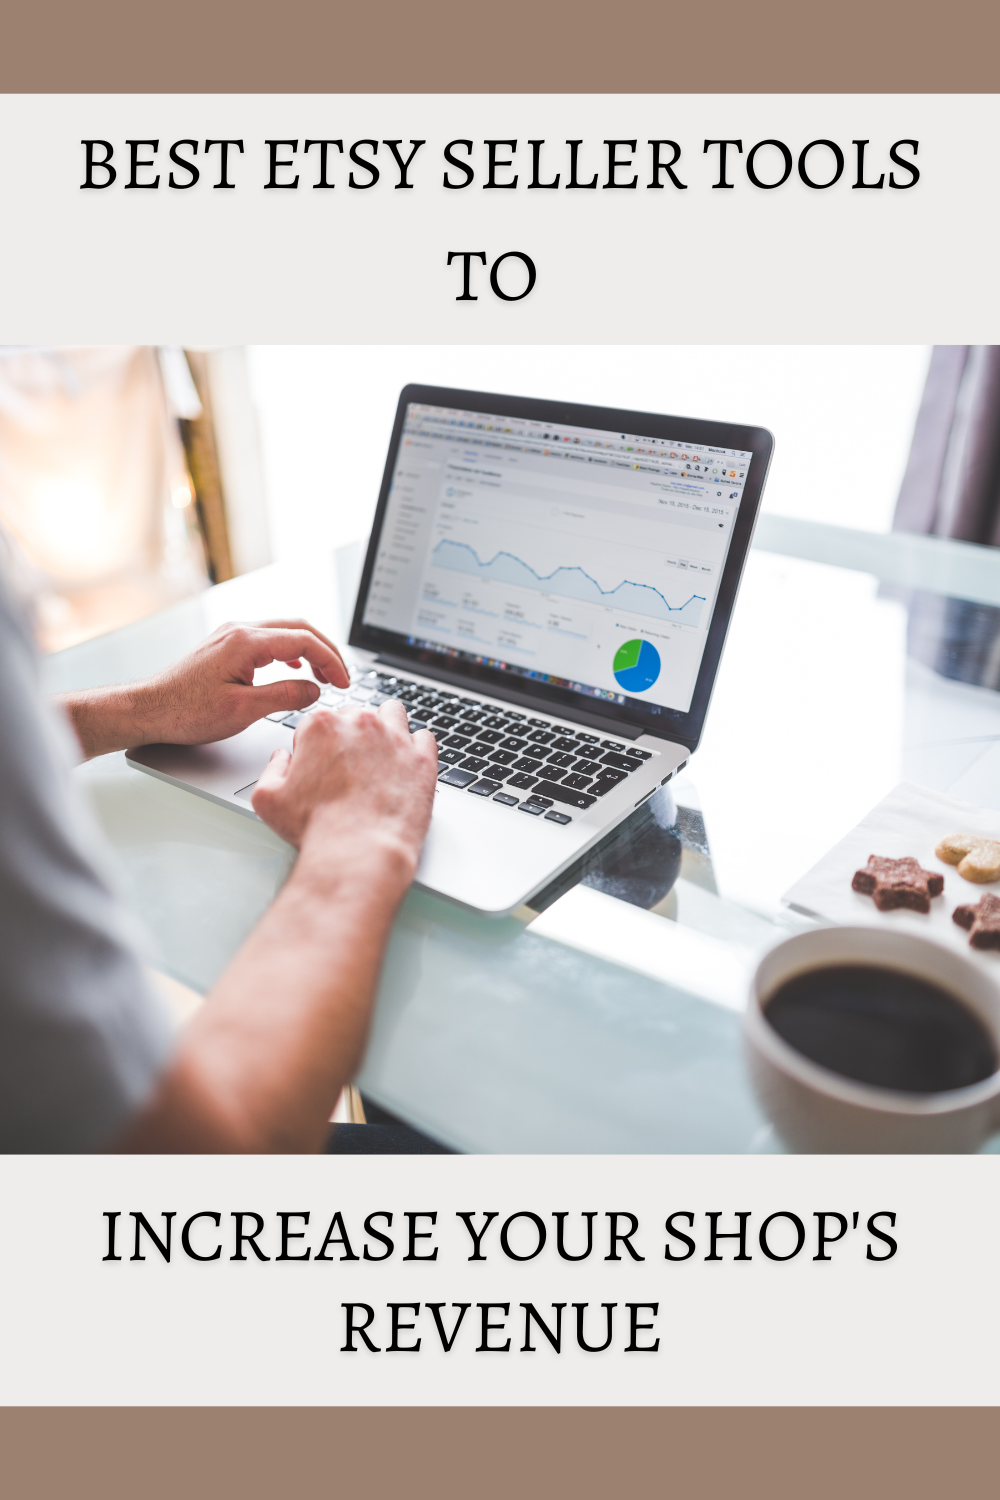 Best Etsy seller tools to increase your shop's revenue